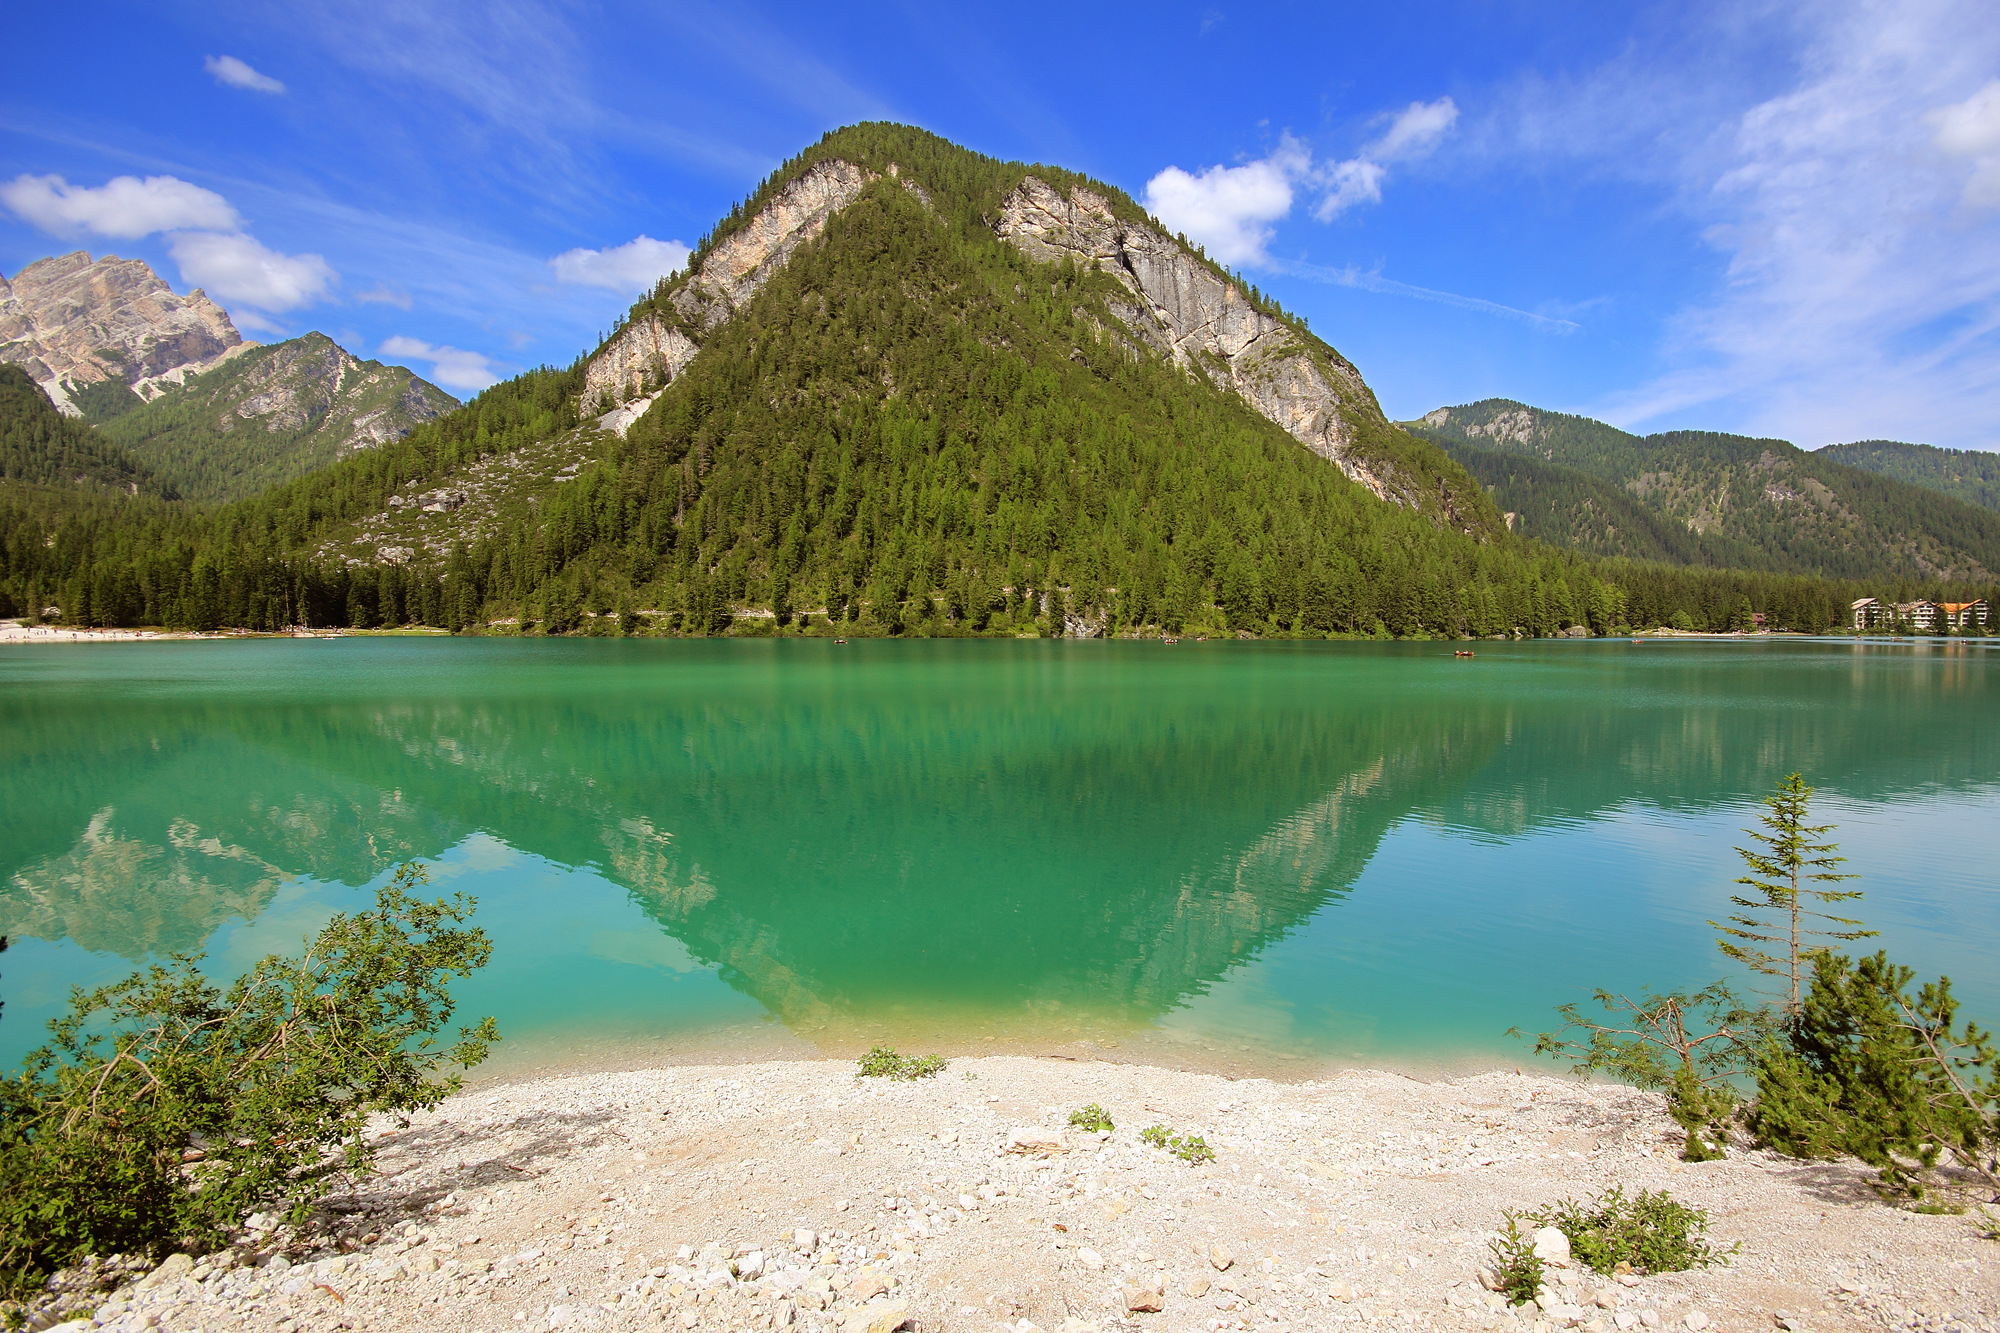 The lake Braies suggestions...